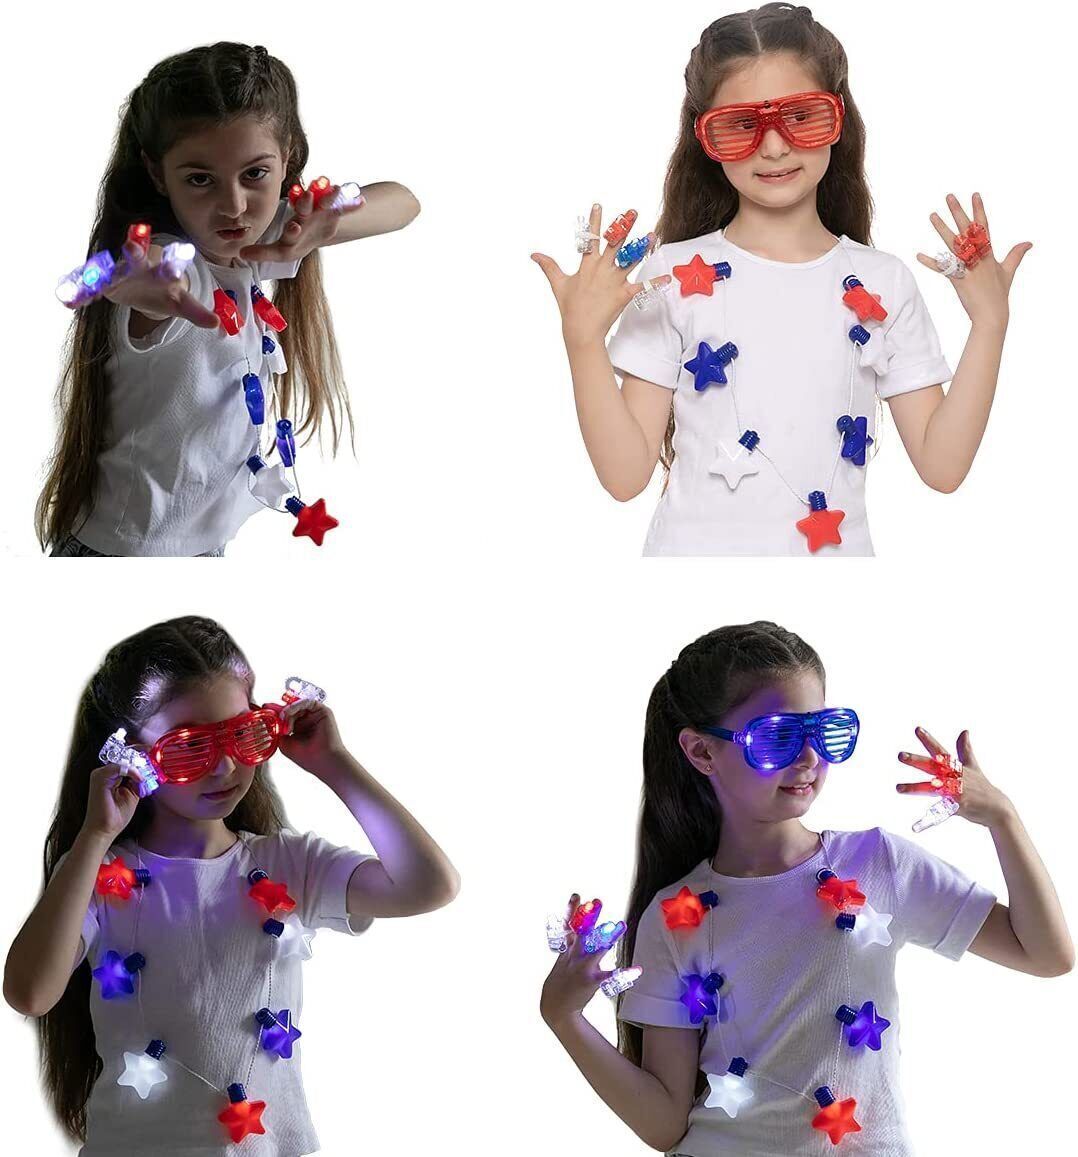 15Pcs 4th of July Party Accessories of LED Glasses Necklaces Finger Lights